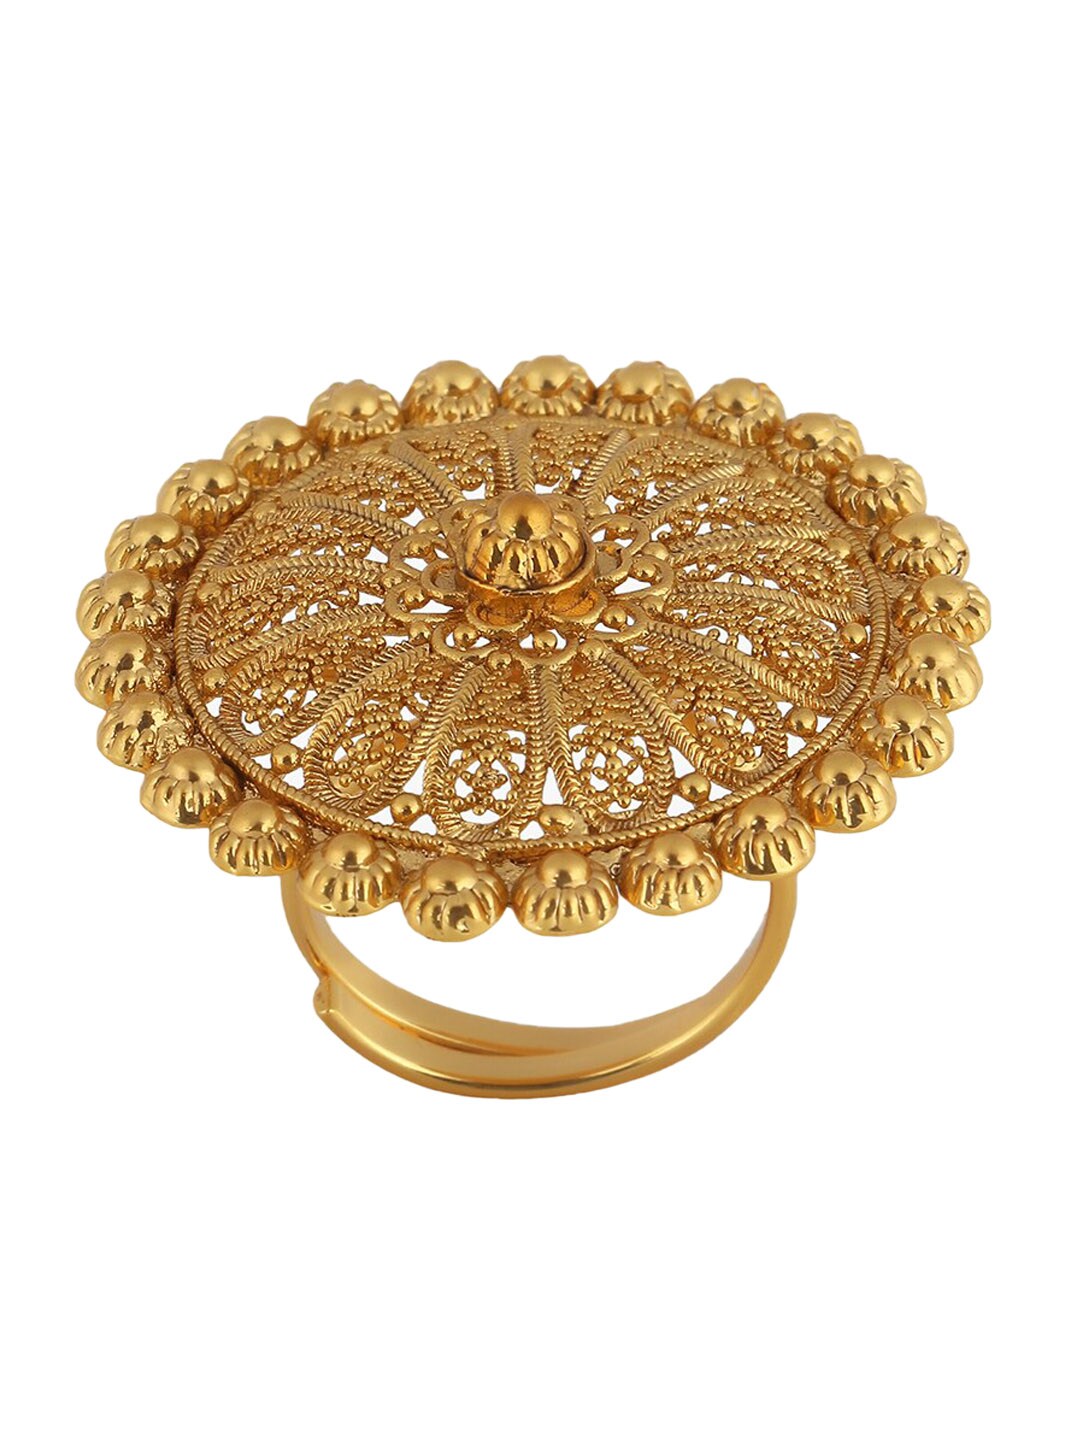 Adwitiya Collection 24 CT Gold-Plated Handcrafted Adjustable Ring Price in India